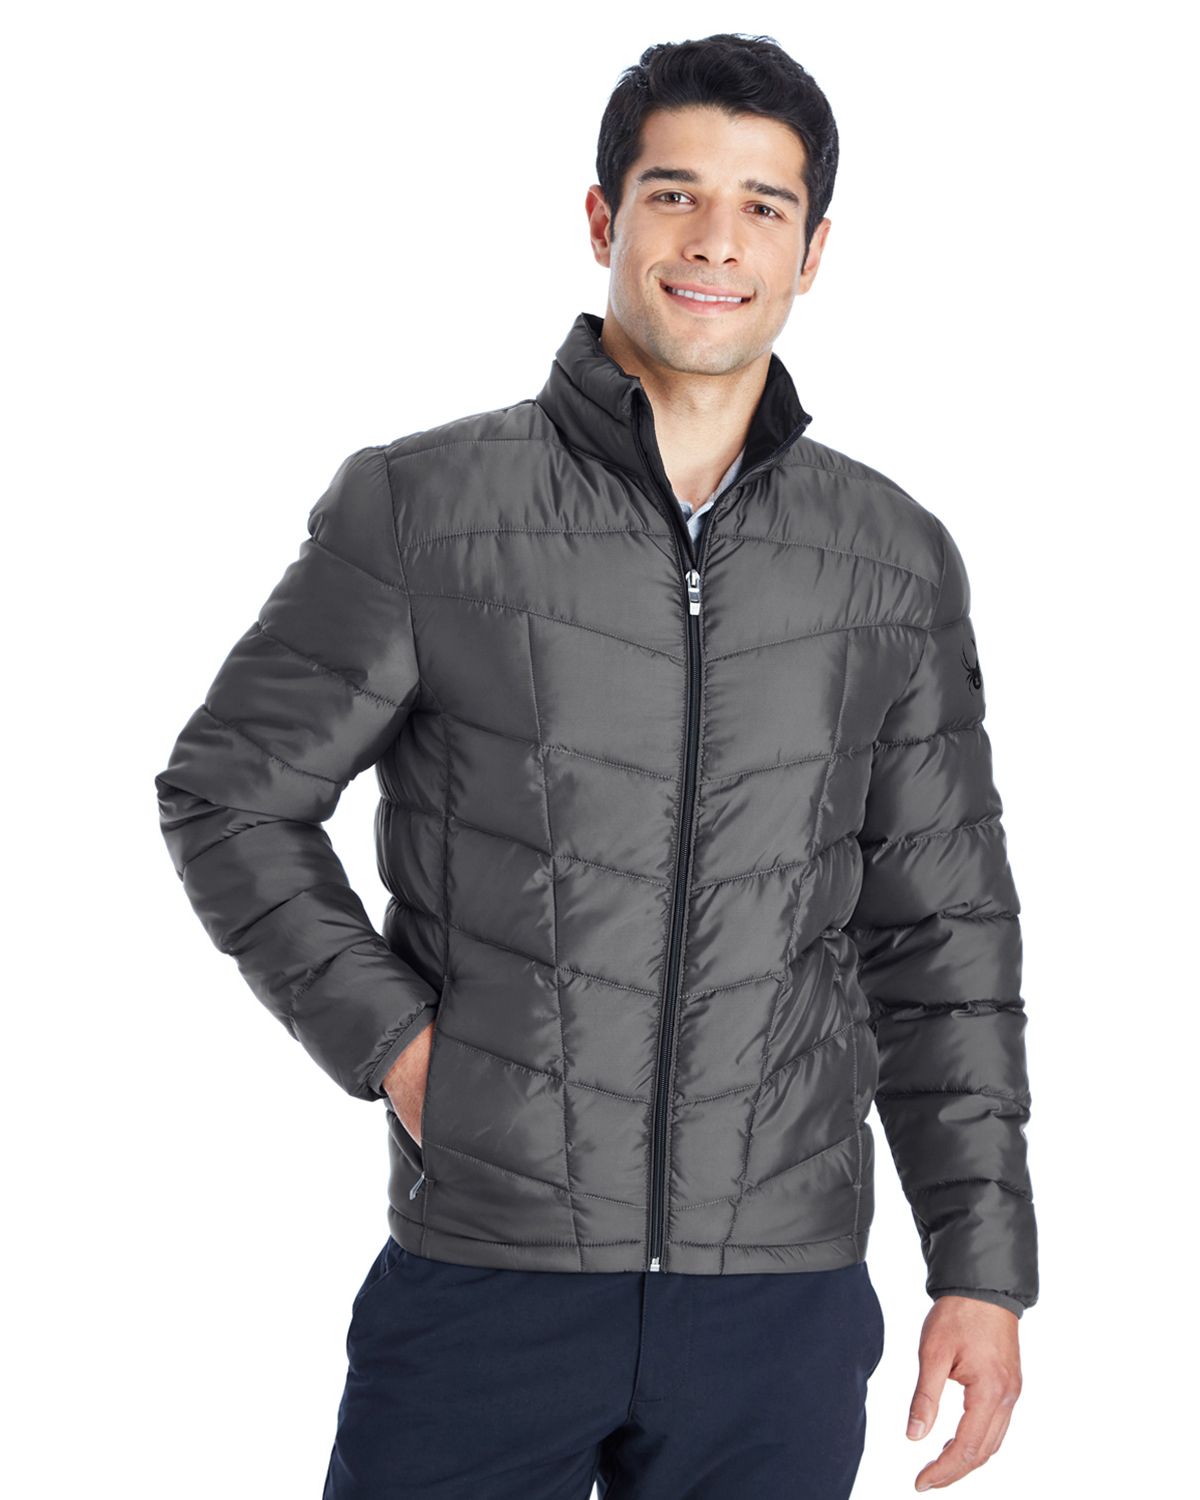 Spyder 187333 Mens Pelmo Insulated Puffer Jacket - Free Shipping Available